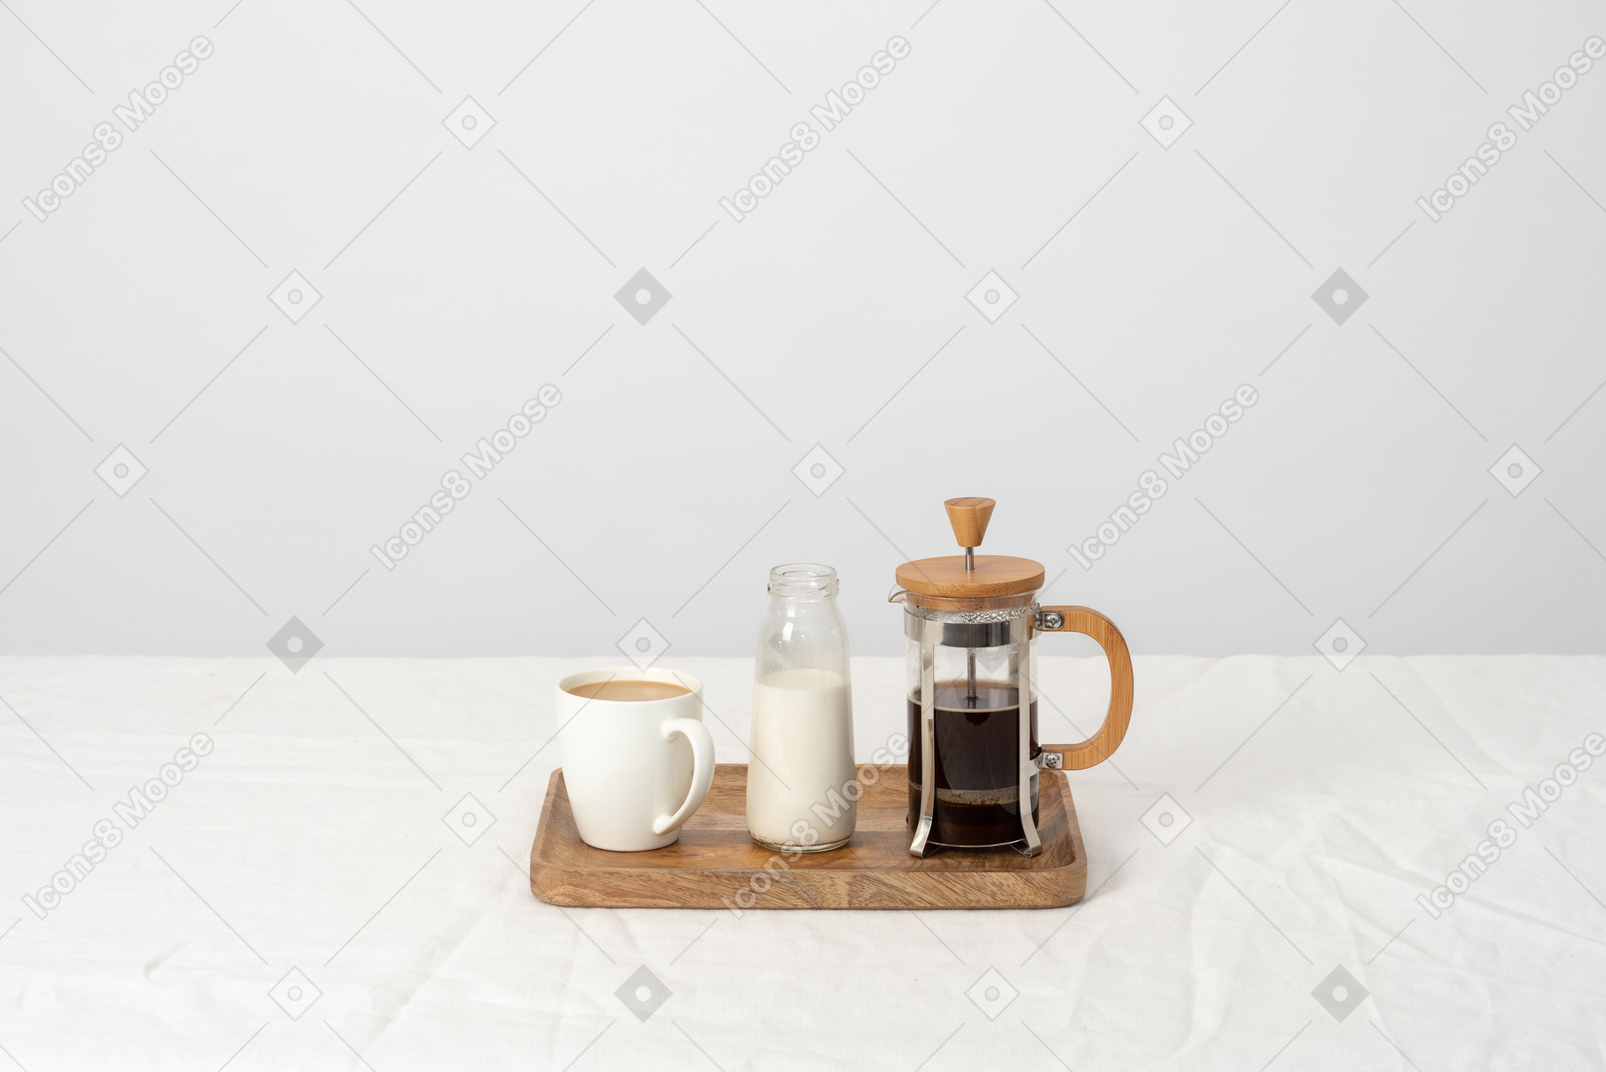 All elements needed for perfect cup of coffee